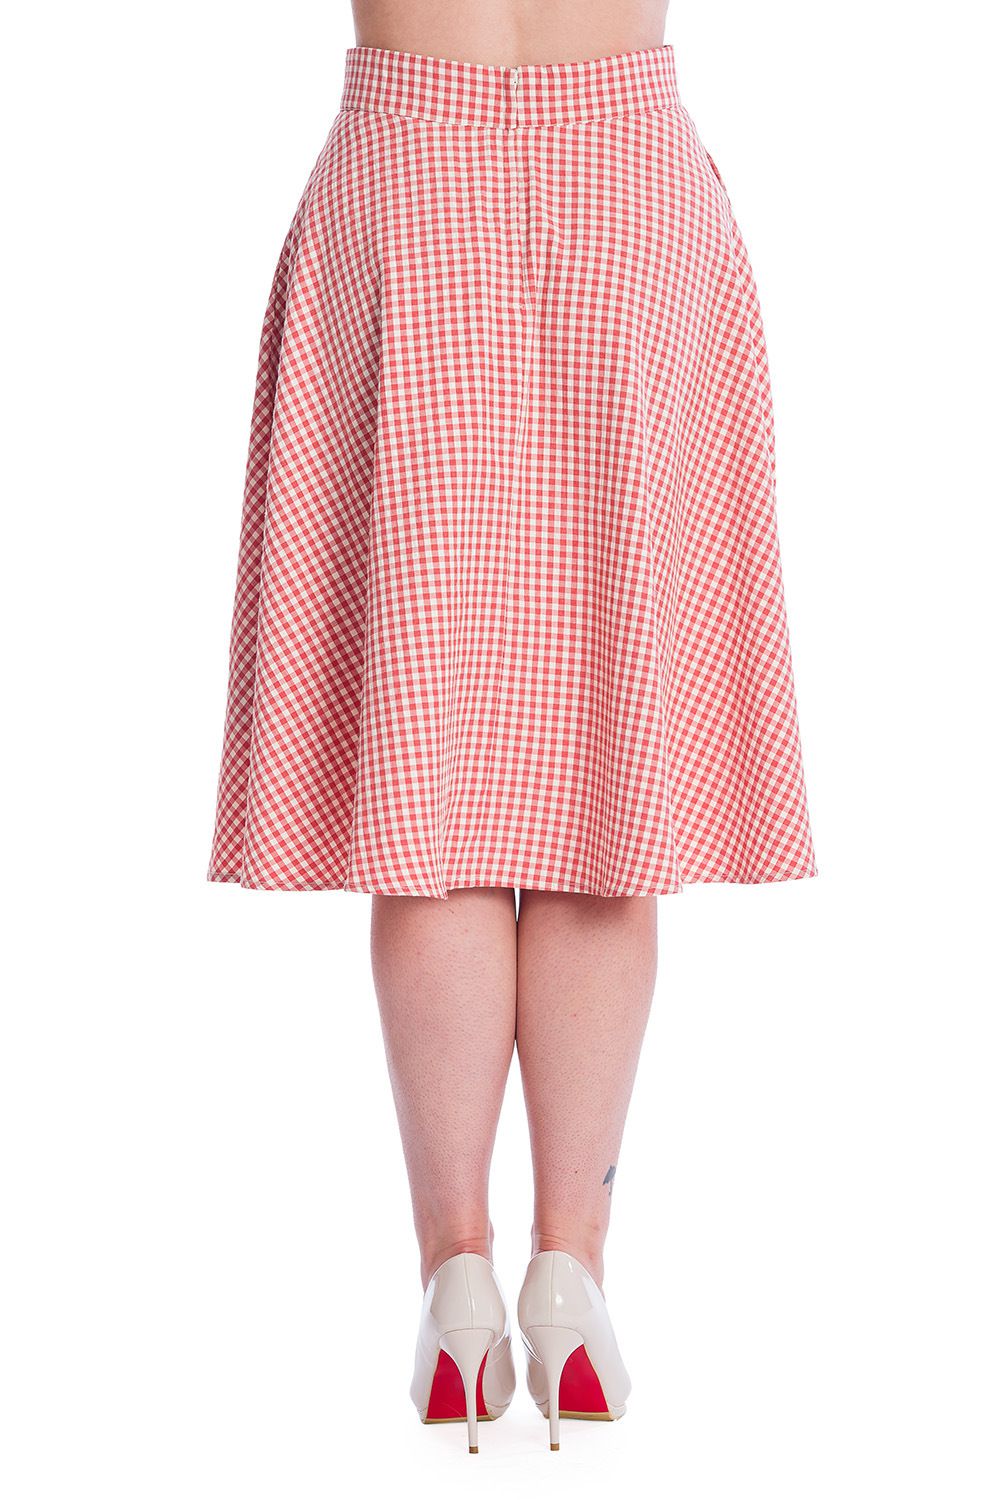 BNSK25342bbbb_jupe-retro-pinup-50-s-rockabilly-banned-gingham-picnic